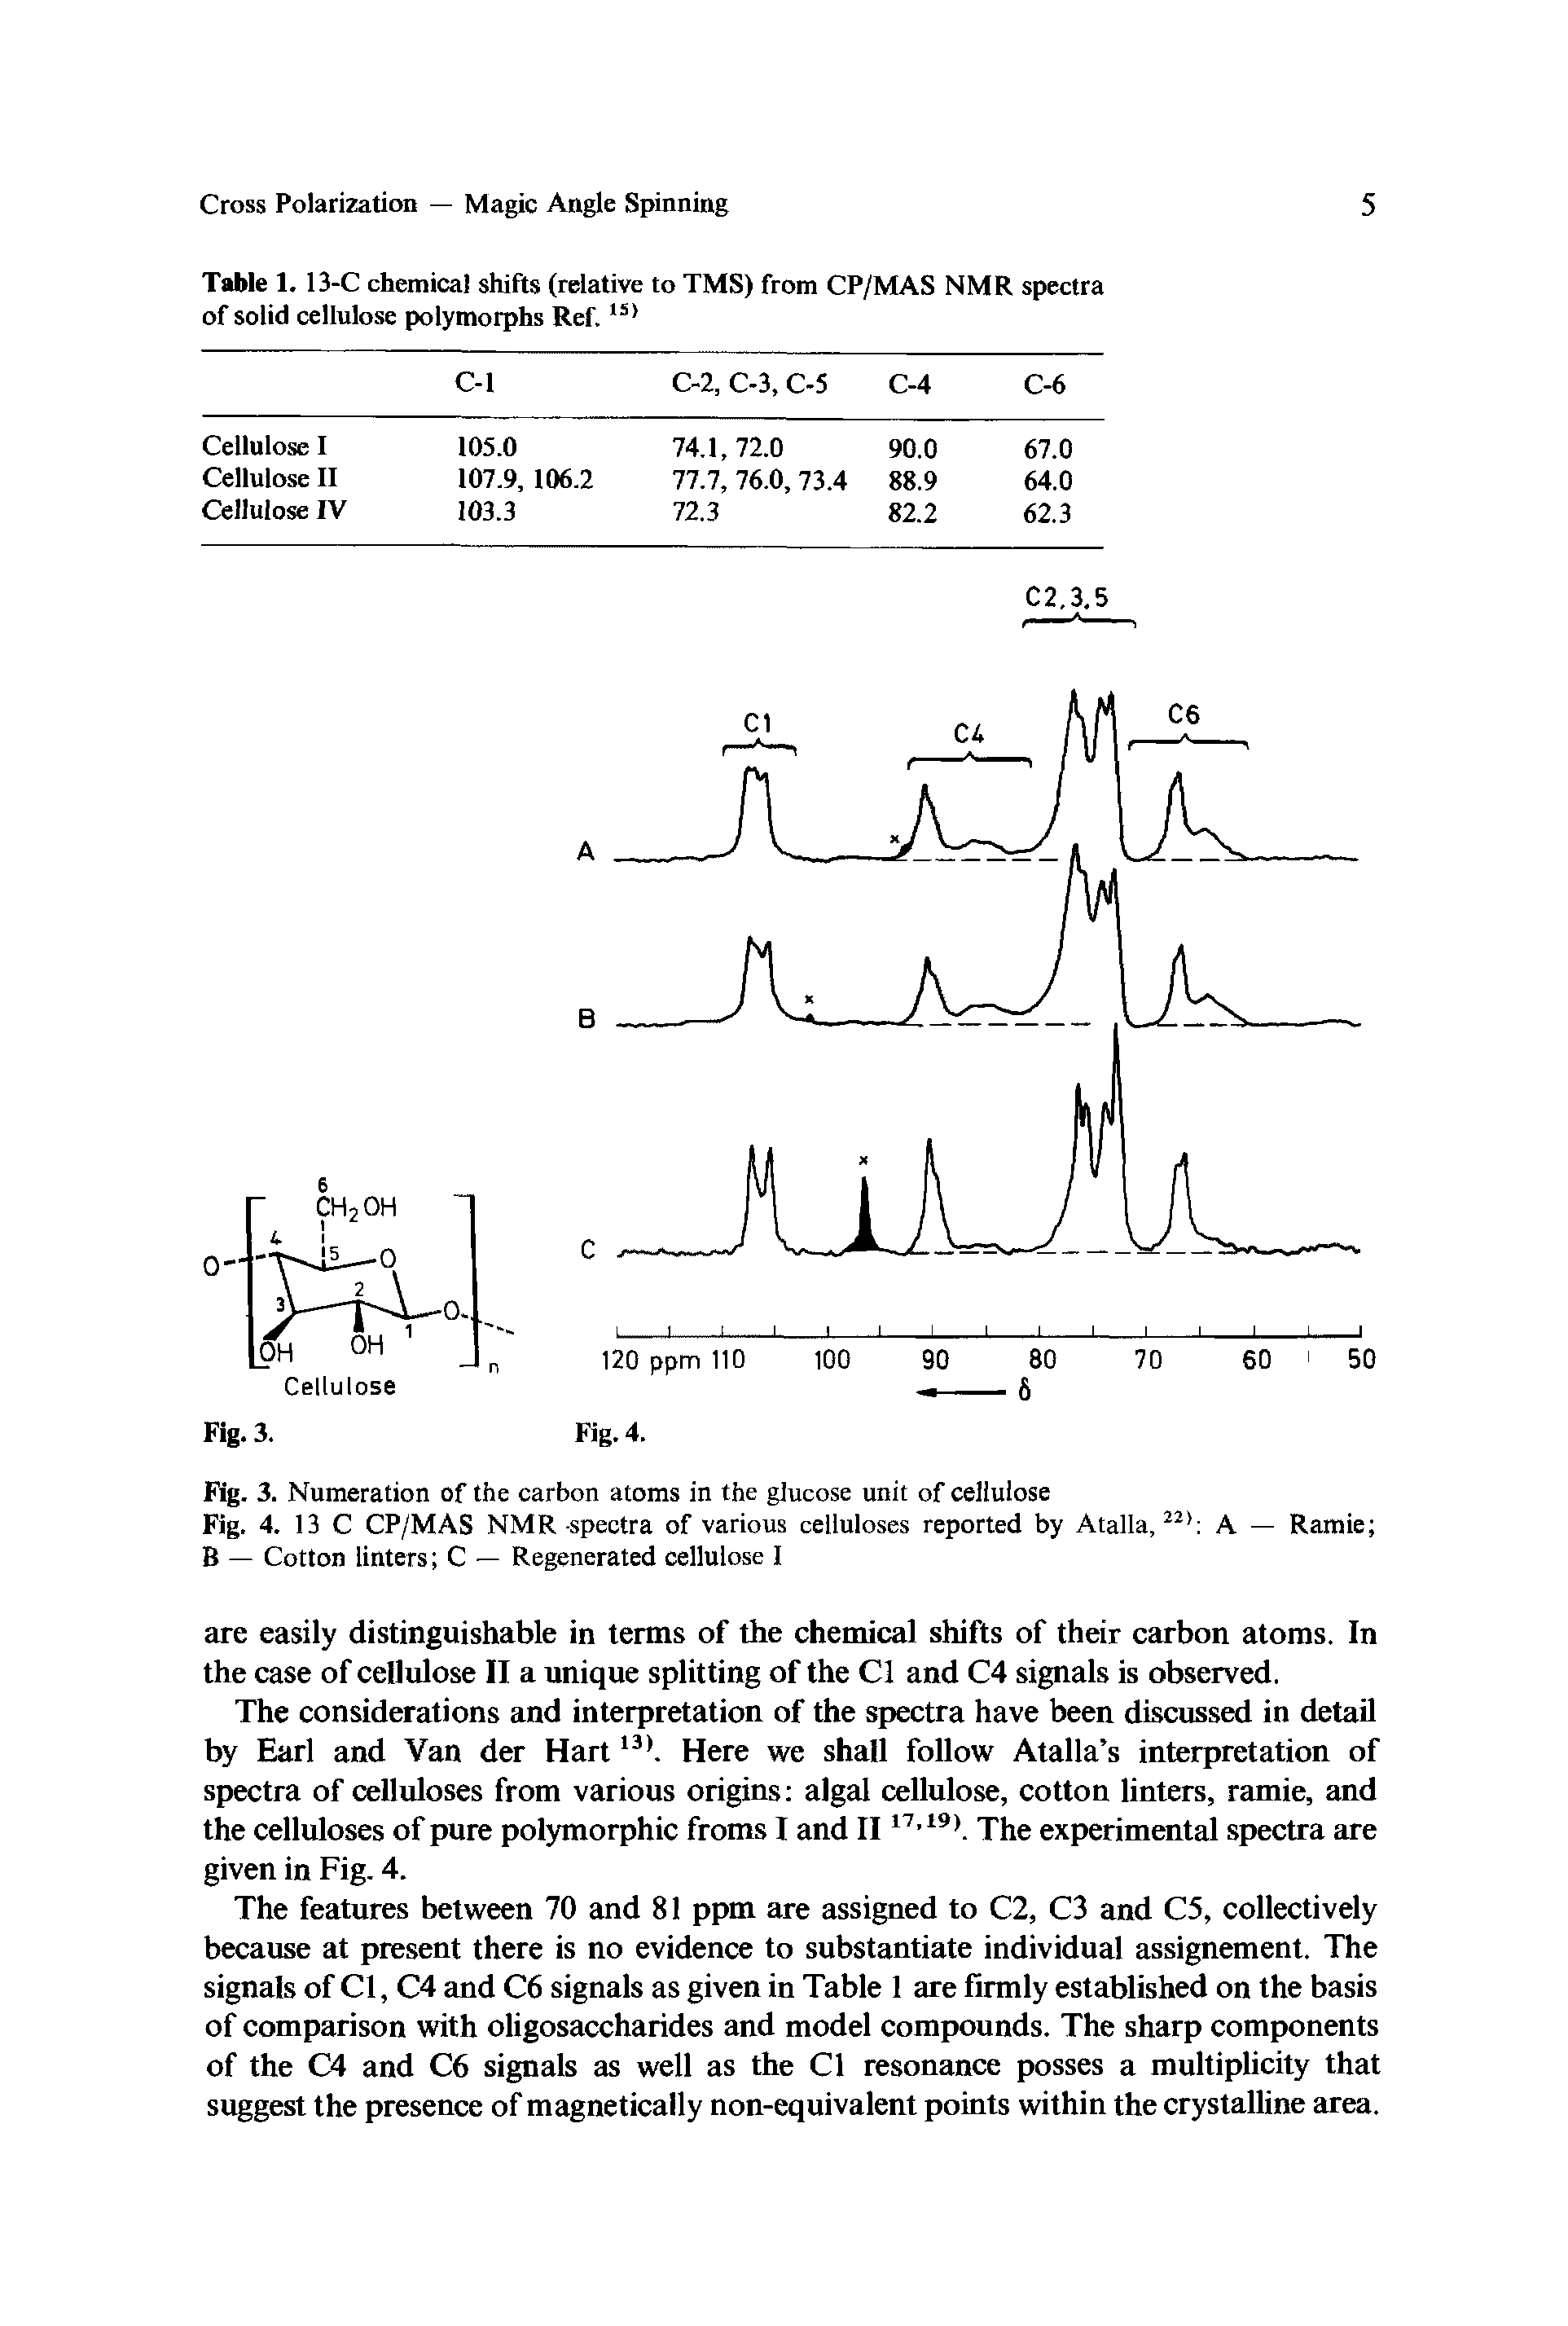 Fig. 4. 13 C CP/MAS NMR-spectra of various celluloses reported by Atalla,22> A — Ramie B — Cotton linters C — Regenerated cellulose I...